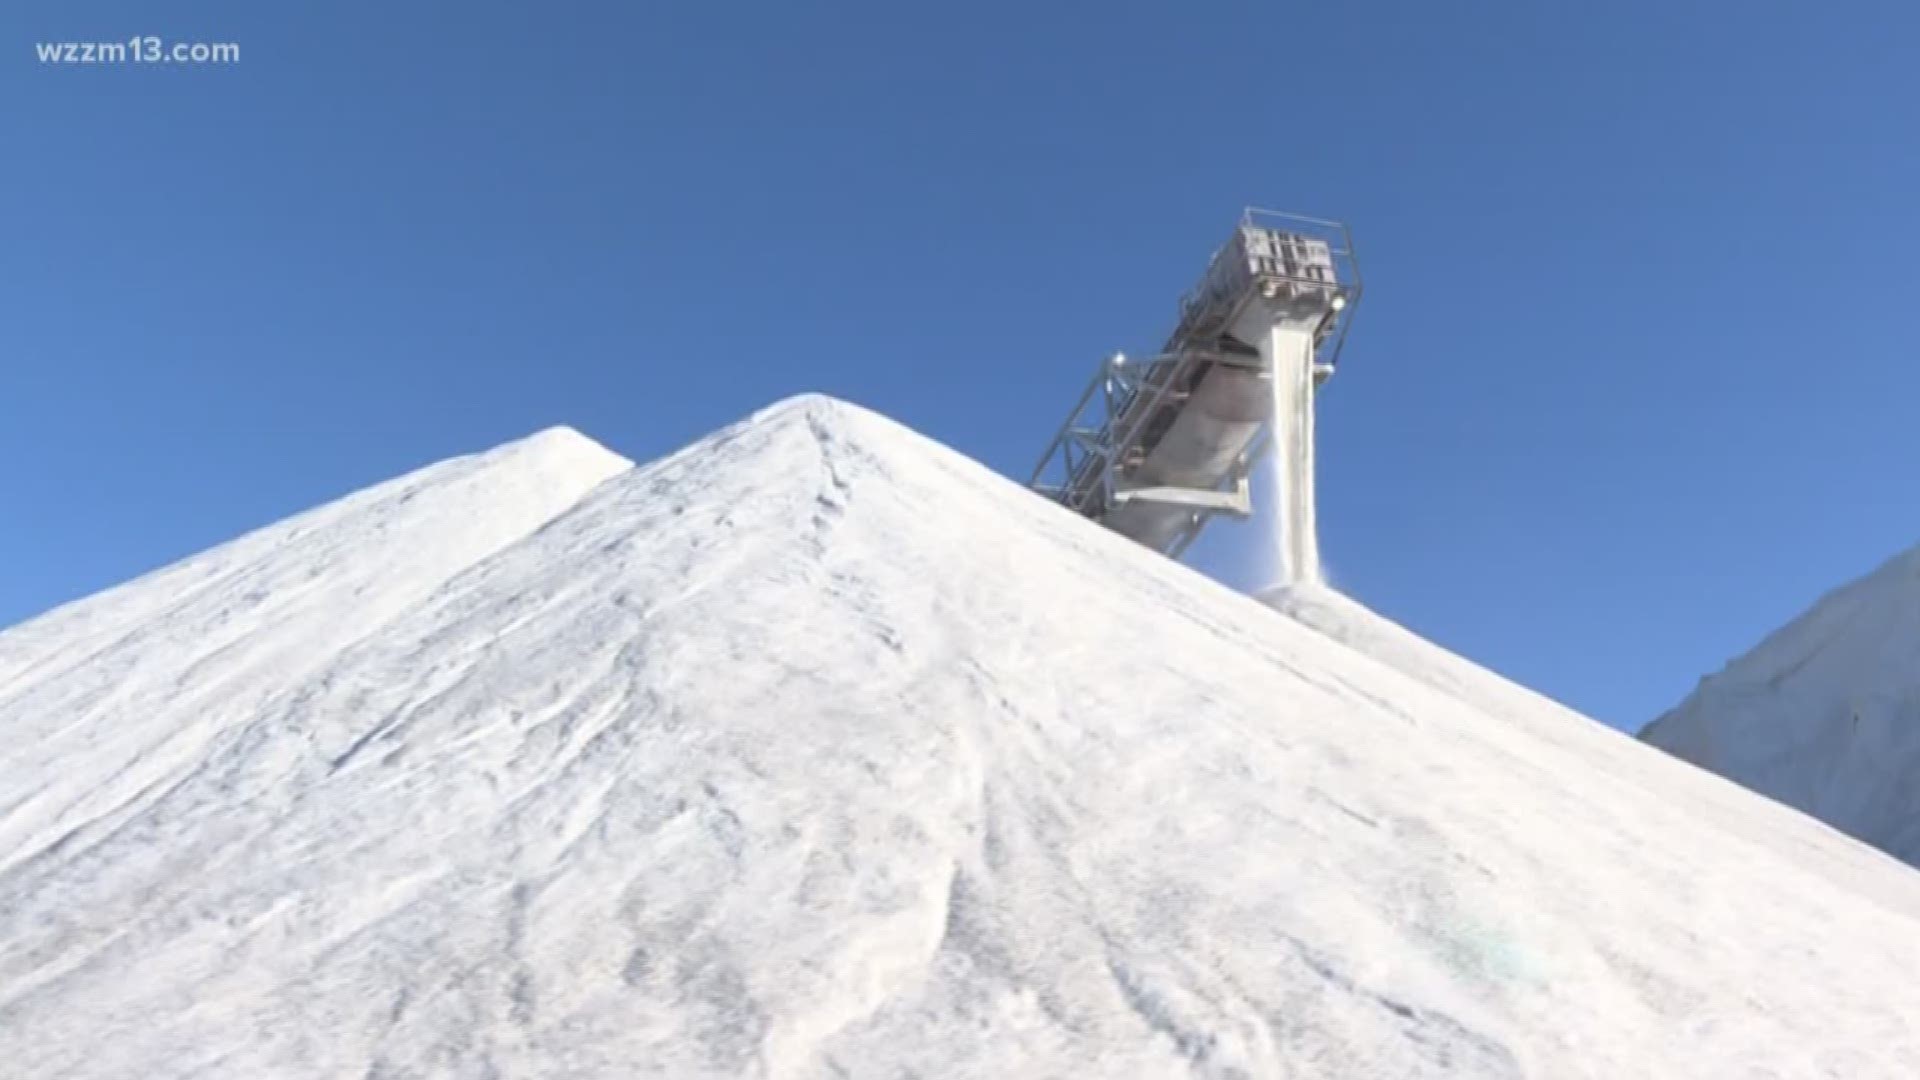 Final shipment of salt for the season arrives in West Michigan